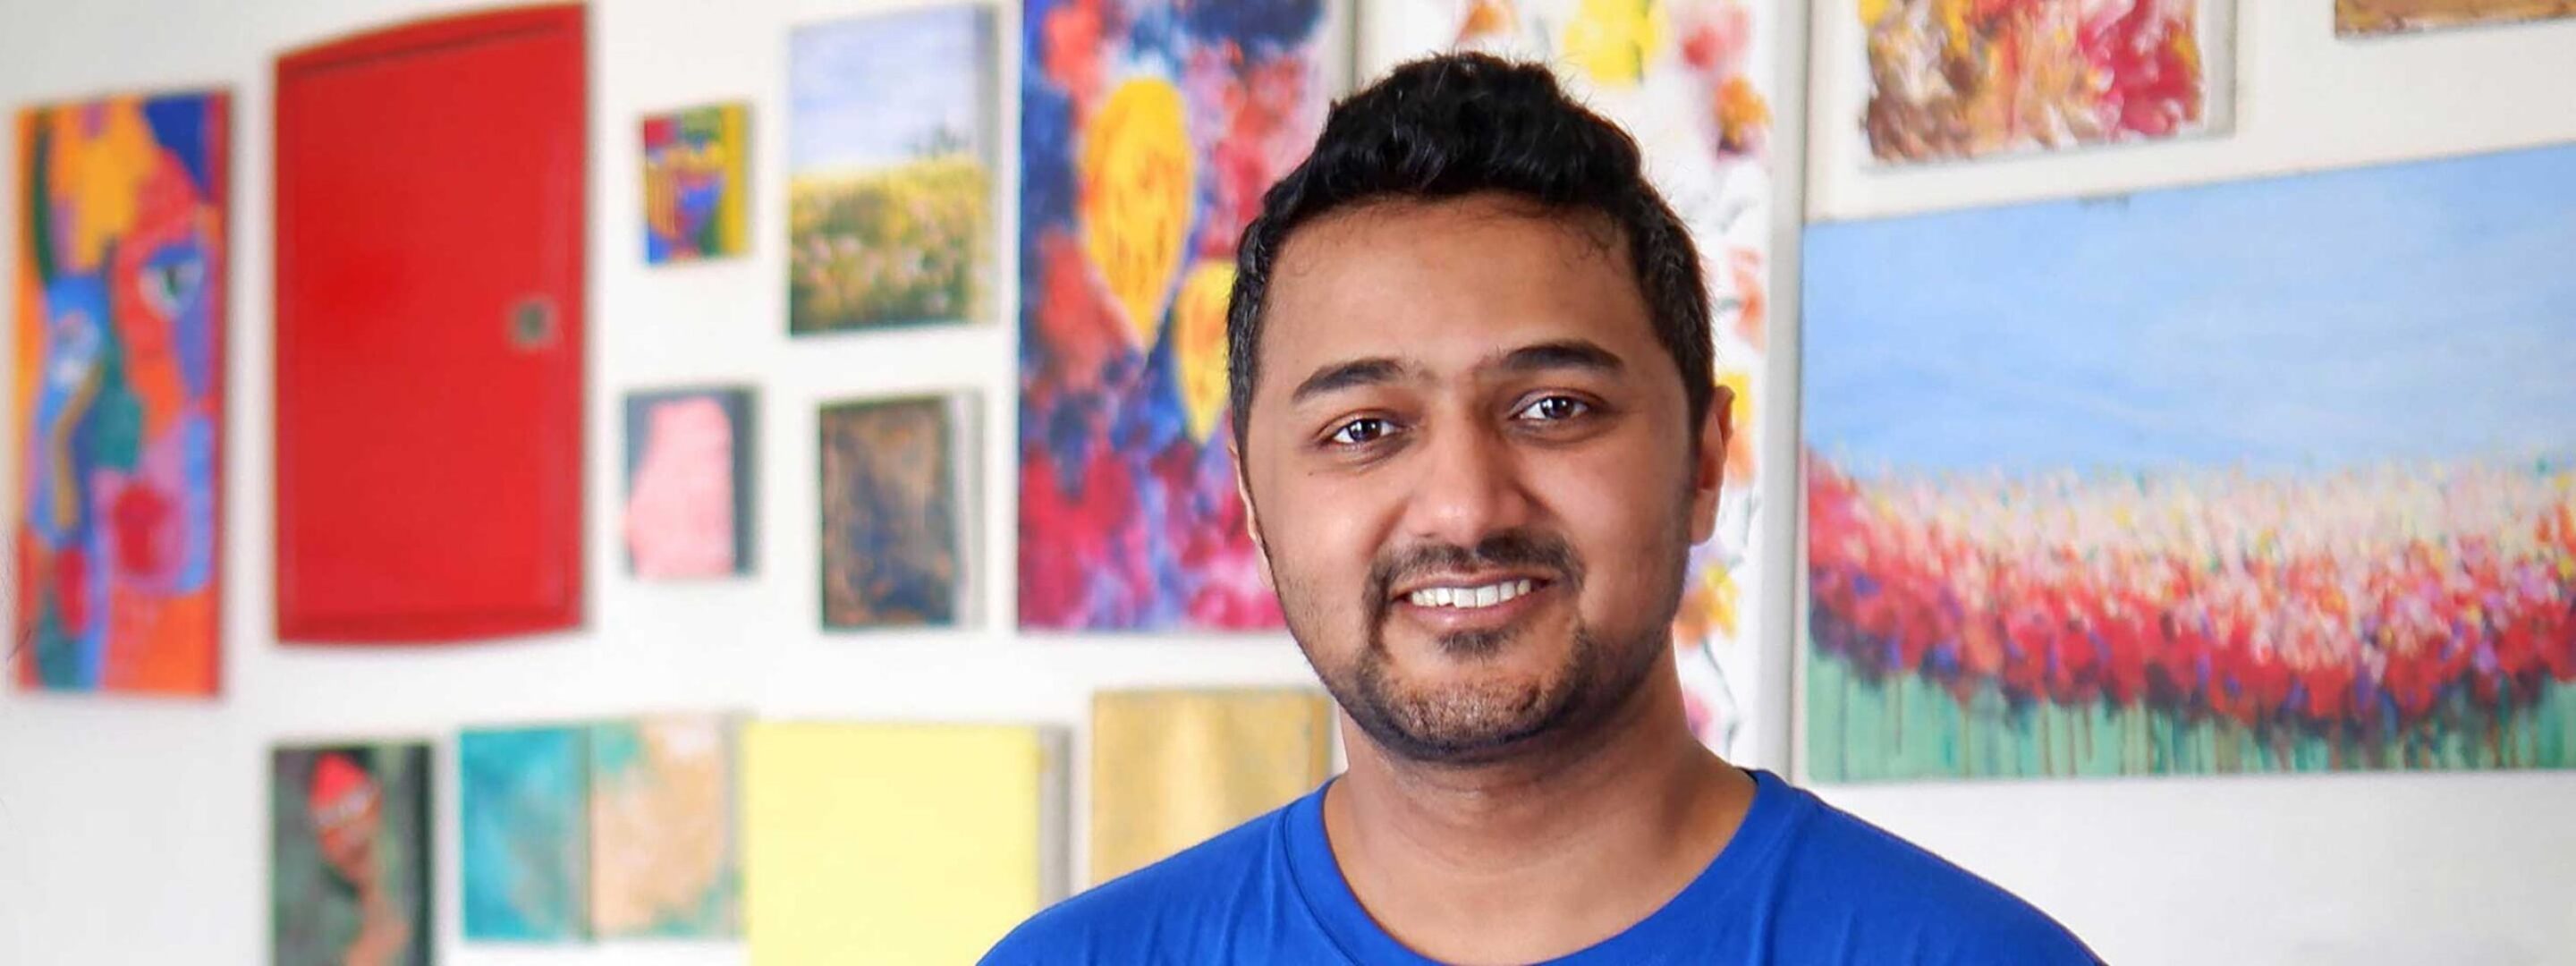 Startup founder Sayem Faruk is connecting tech talents globally